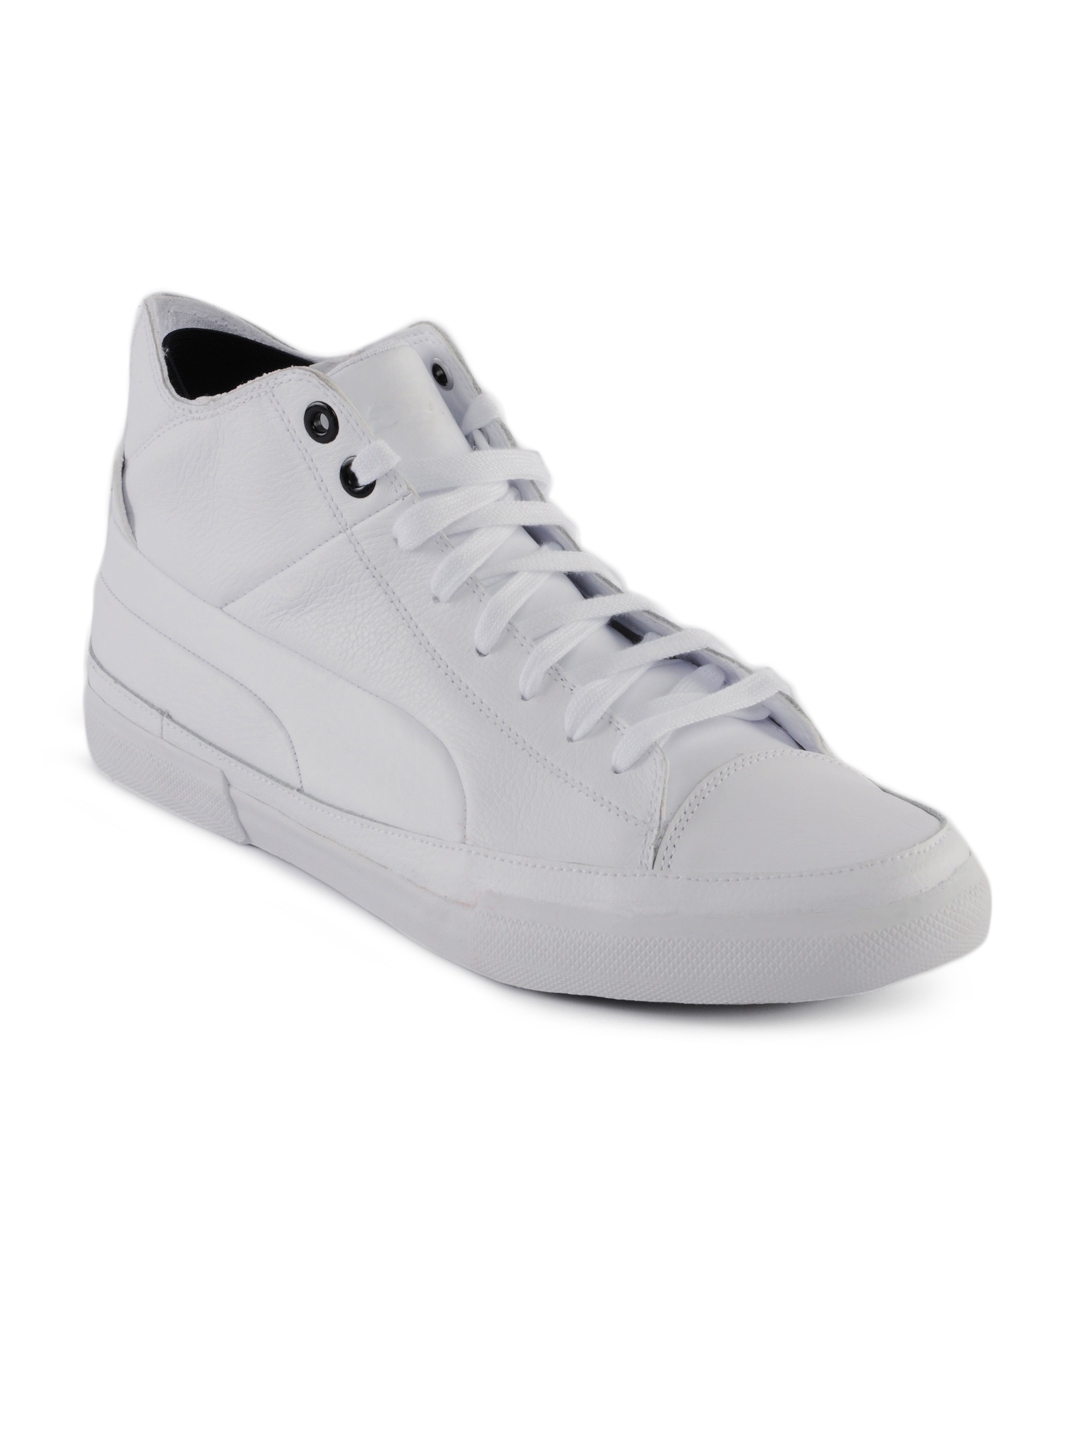 Buy Puma Men Street Step Mid White Shoes - Casual Shoes for Men 26670 ...